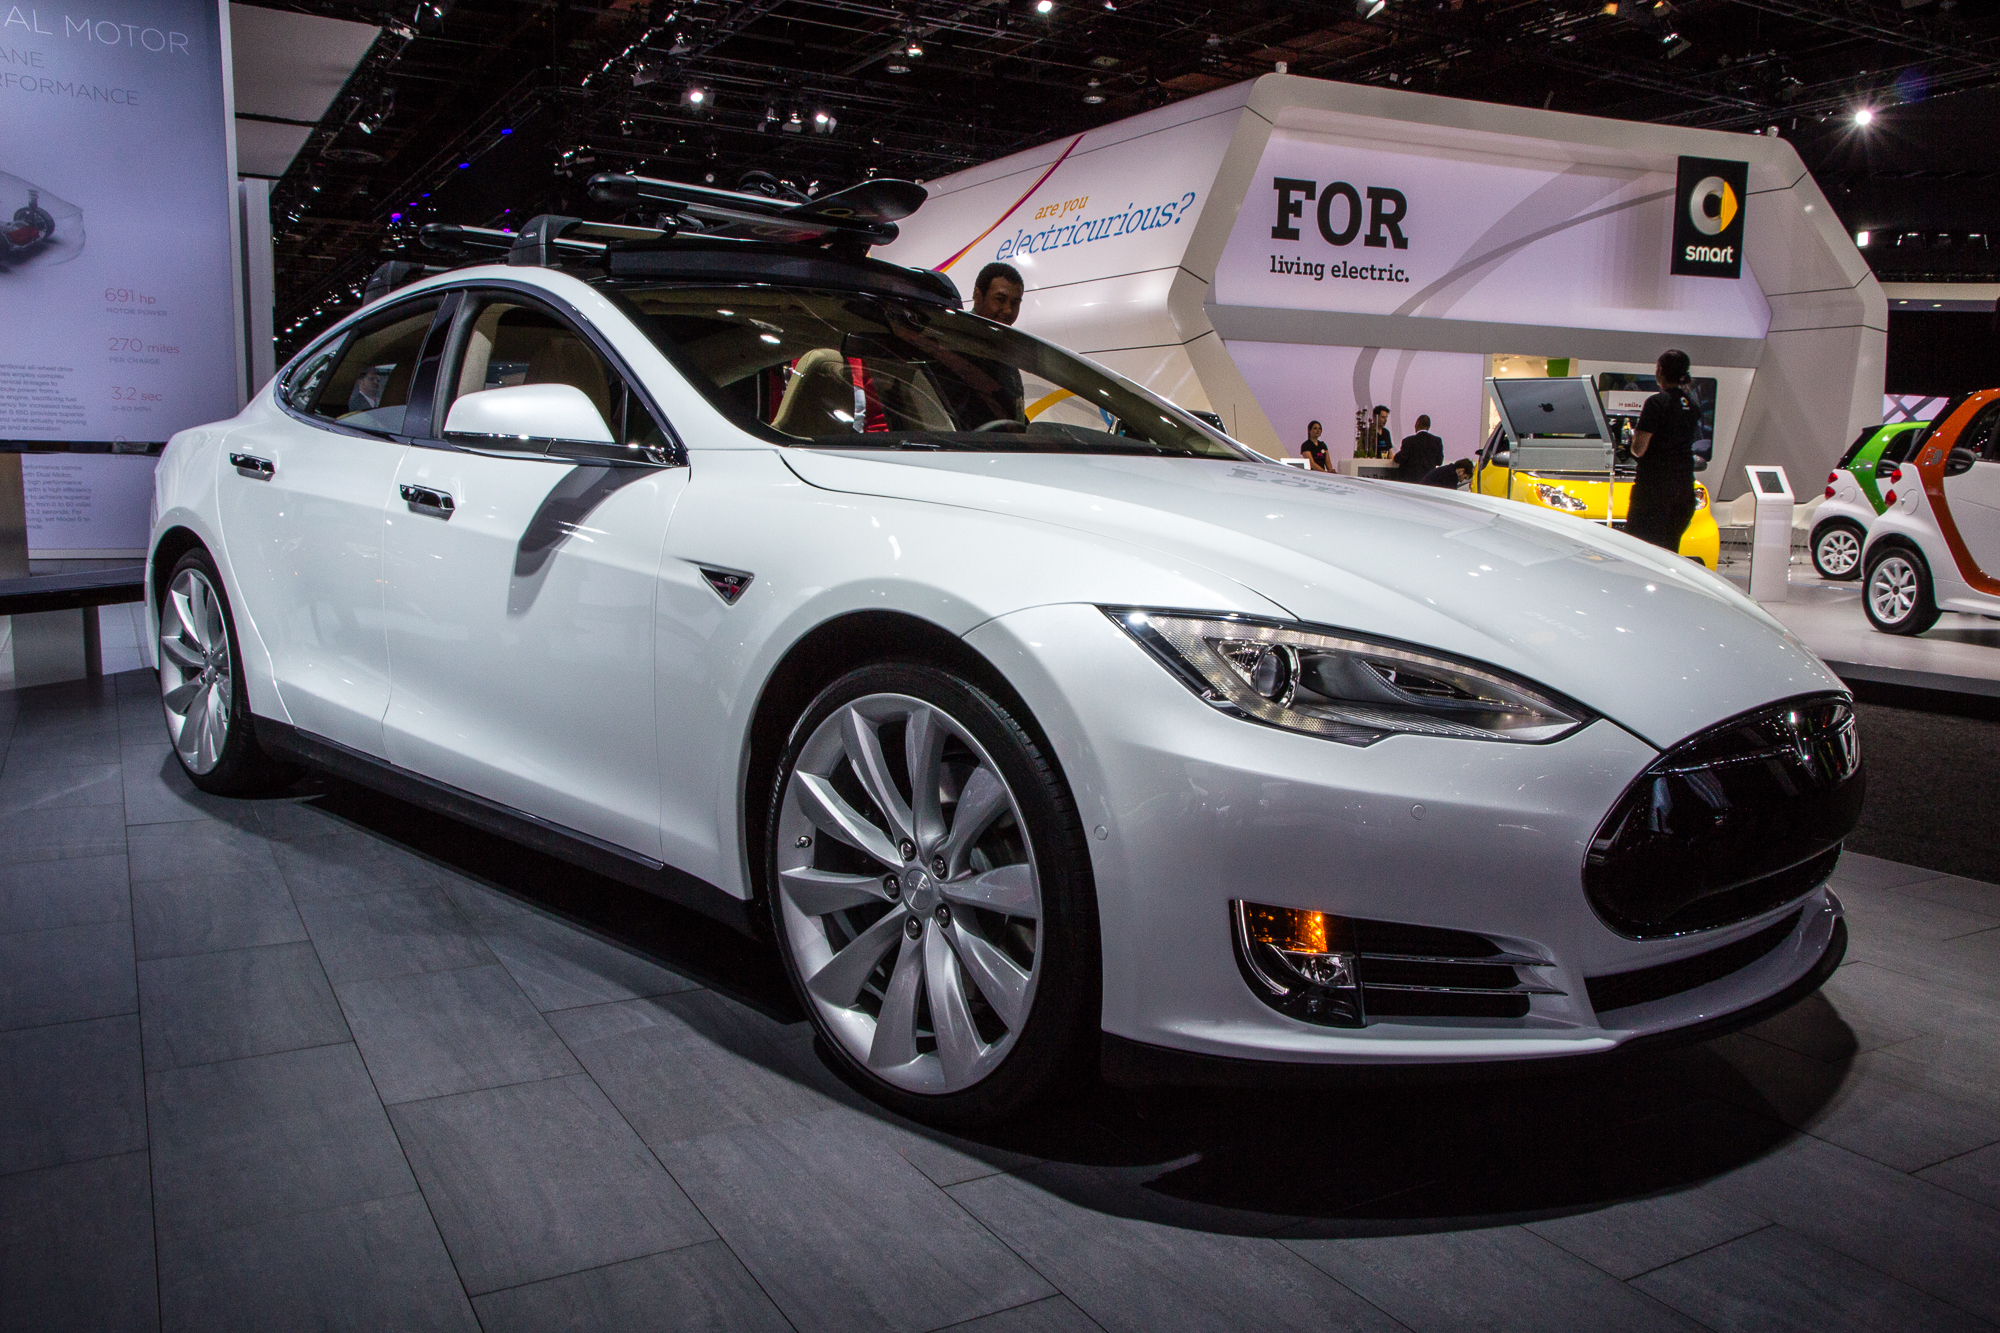 Partina City toediening september How Many Tesla Model S Electric Cars Have Been Built So Far?